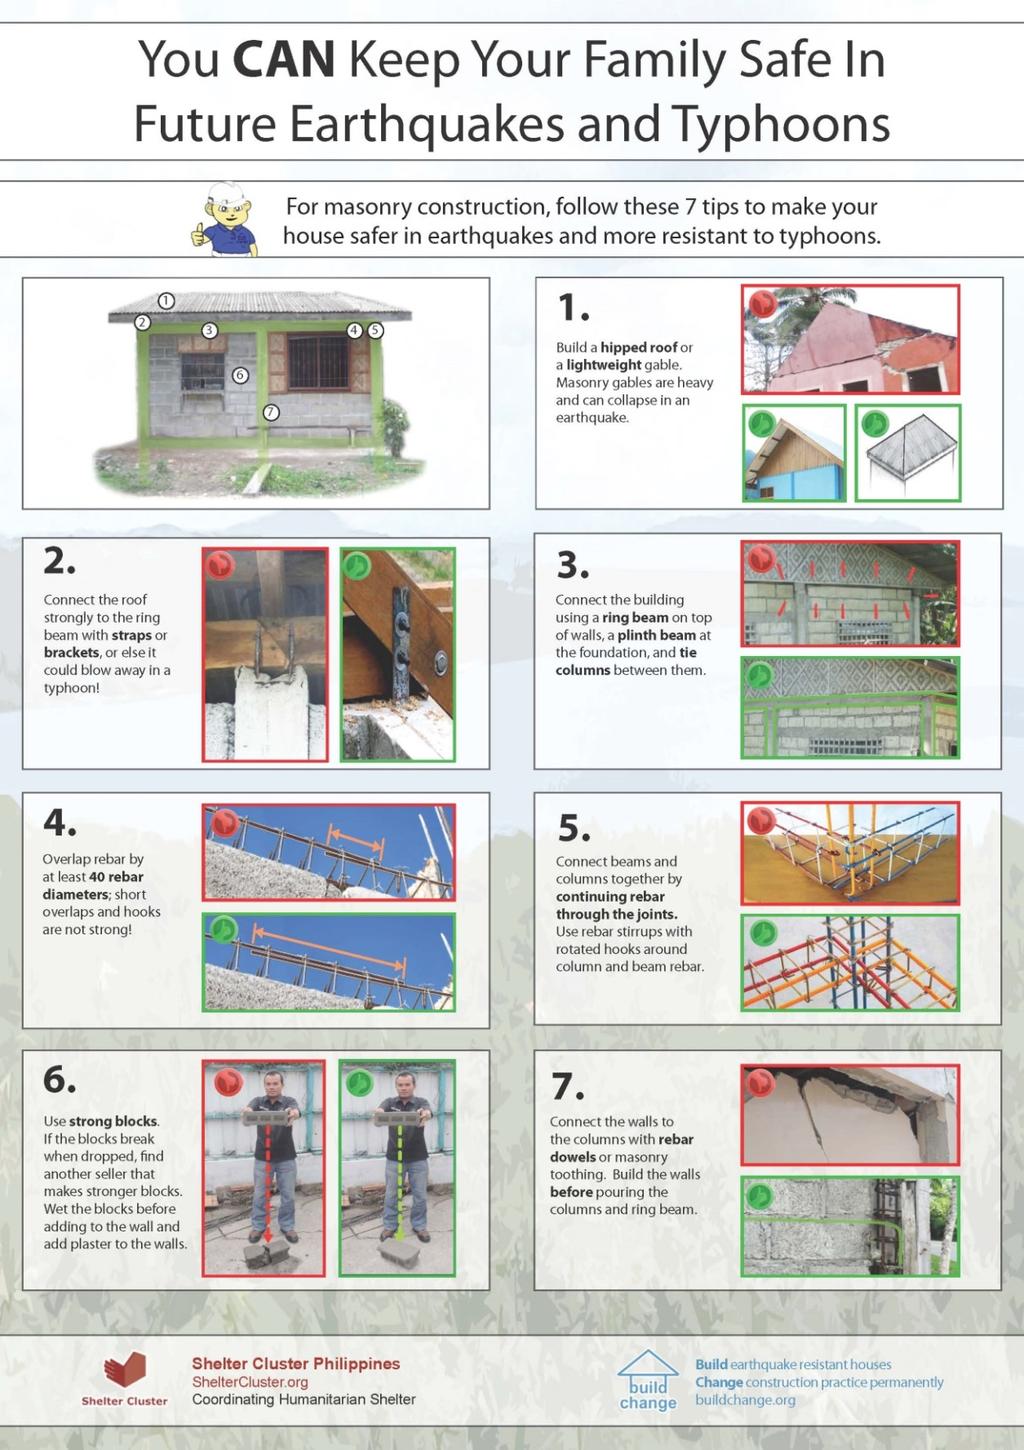 For more Build Change resources on safe construction in the